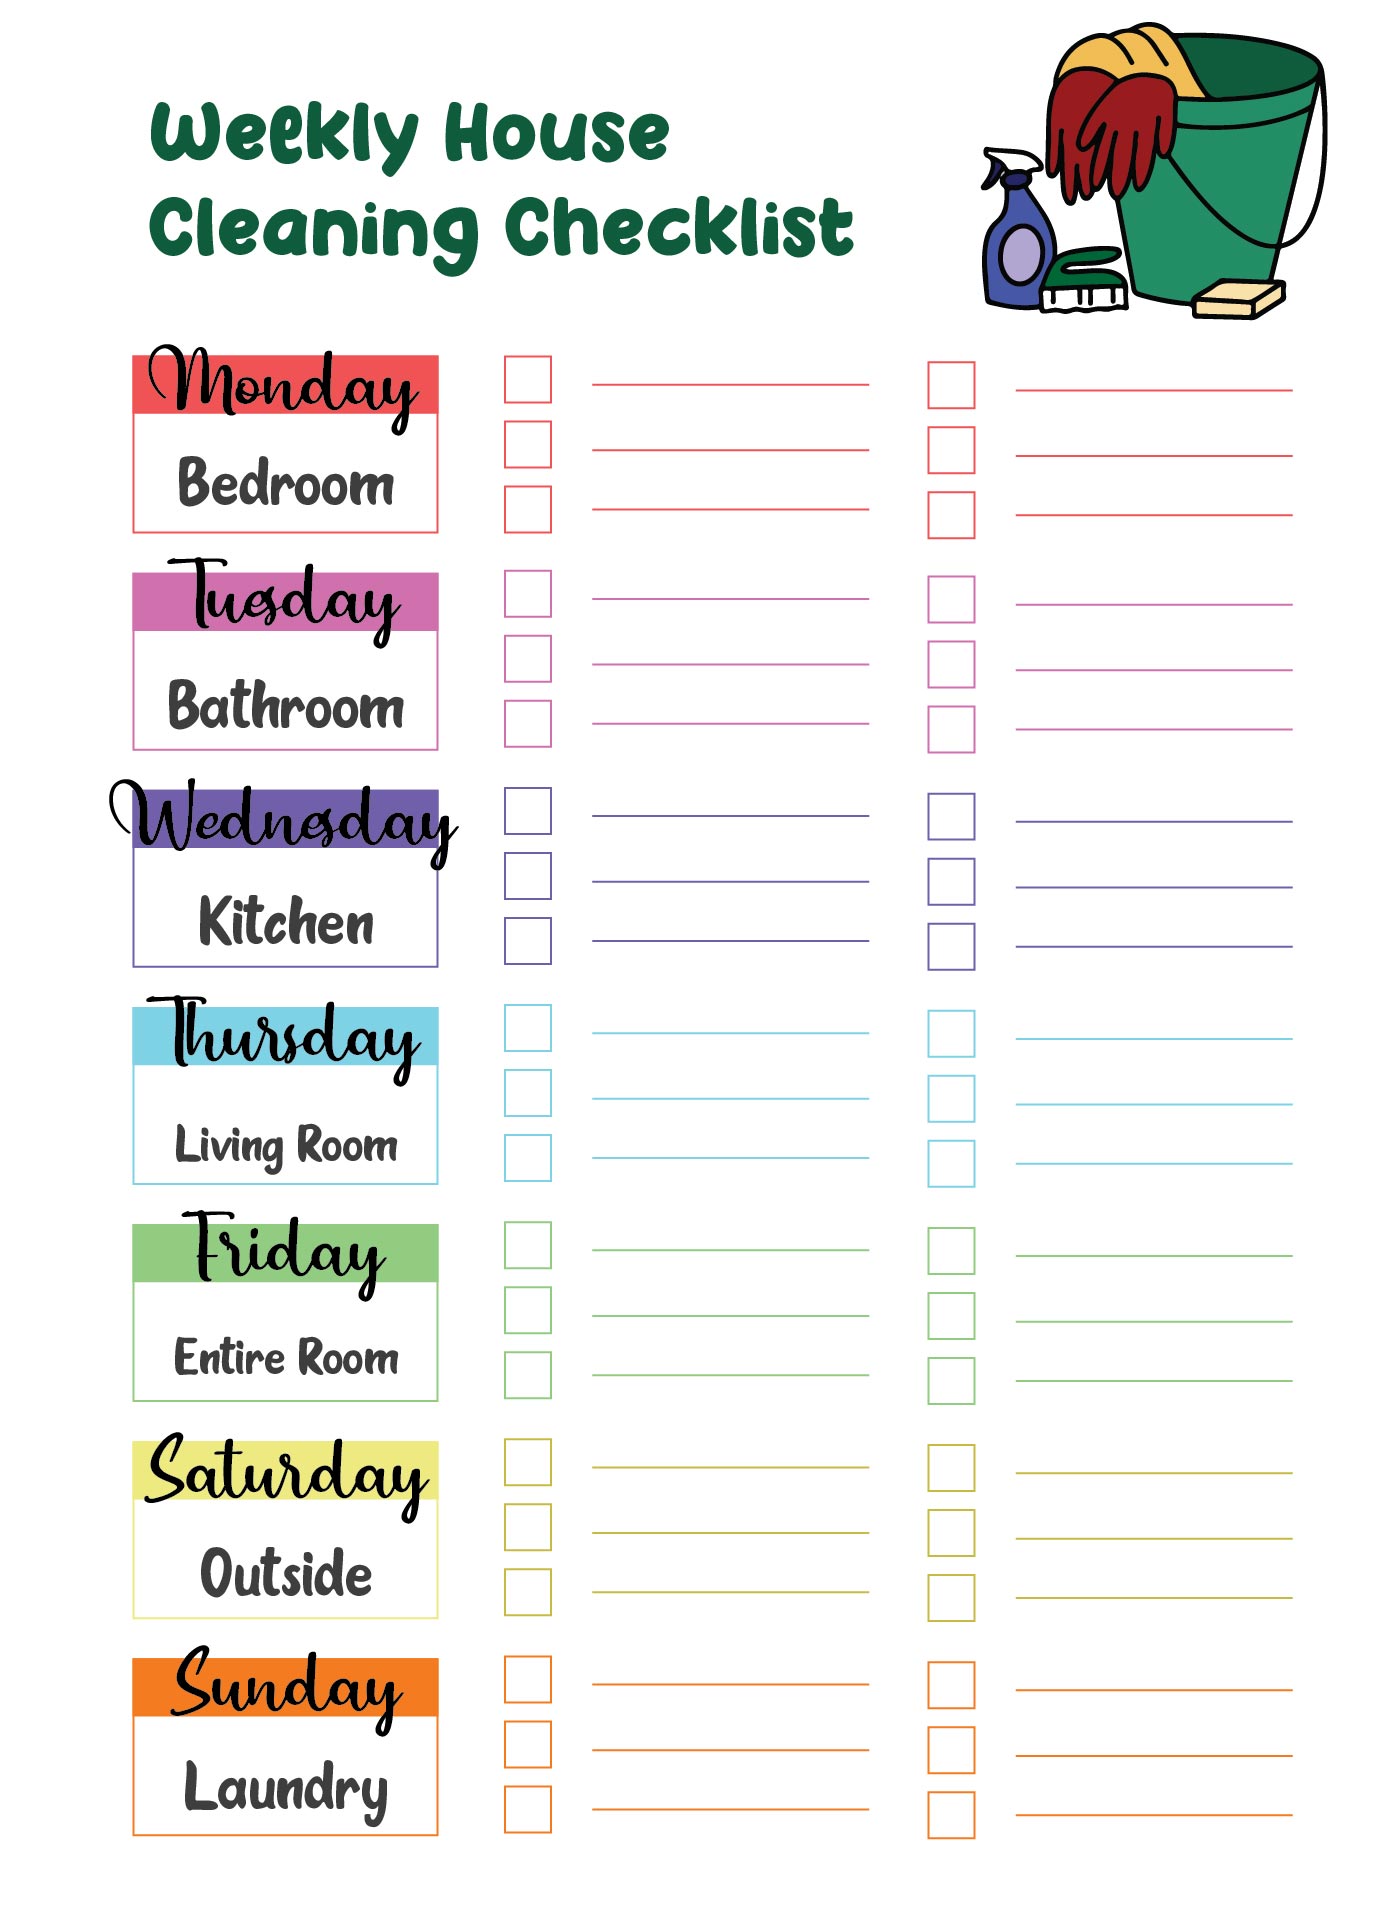 house-cleaning-schedule-printable-scheduled-chore-schedules-cleaned